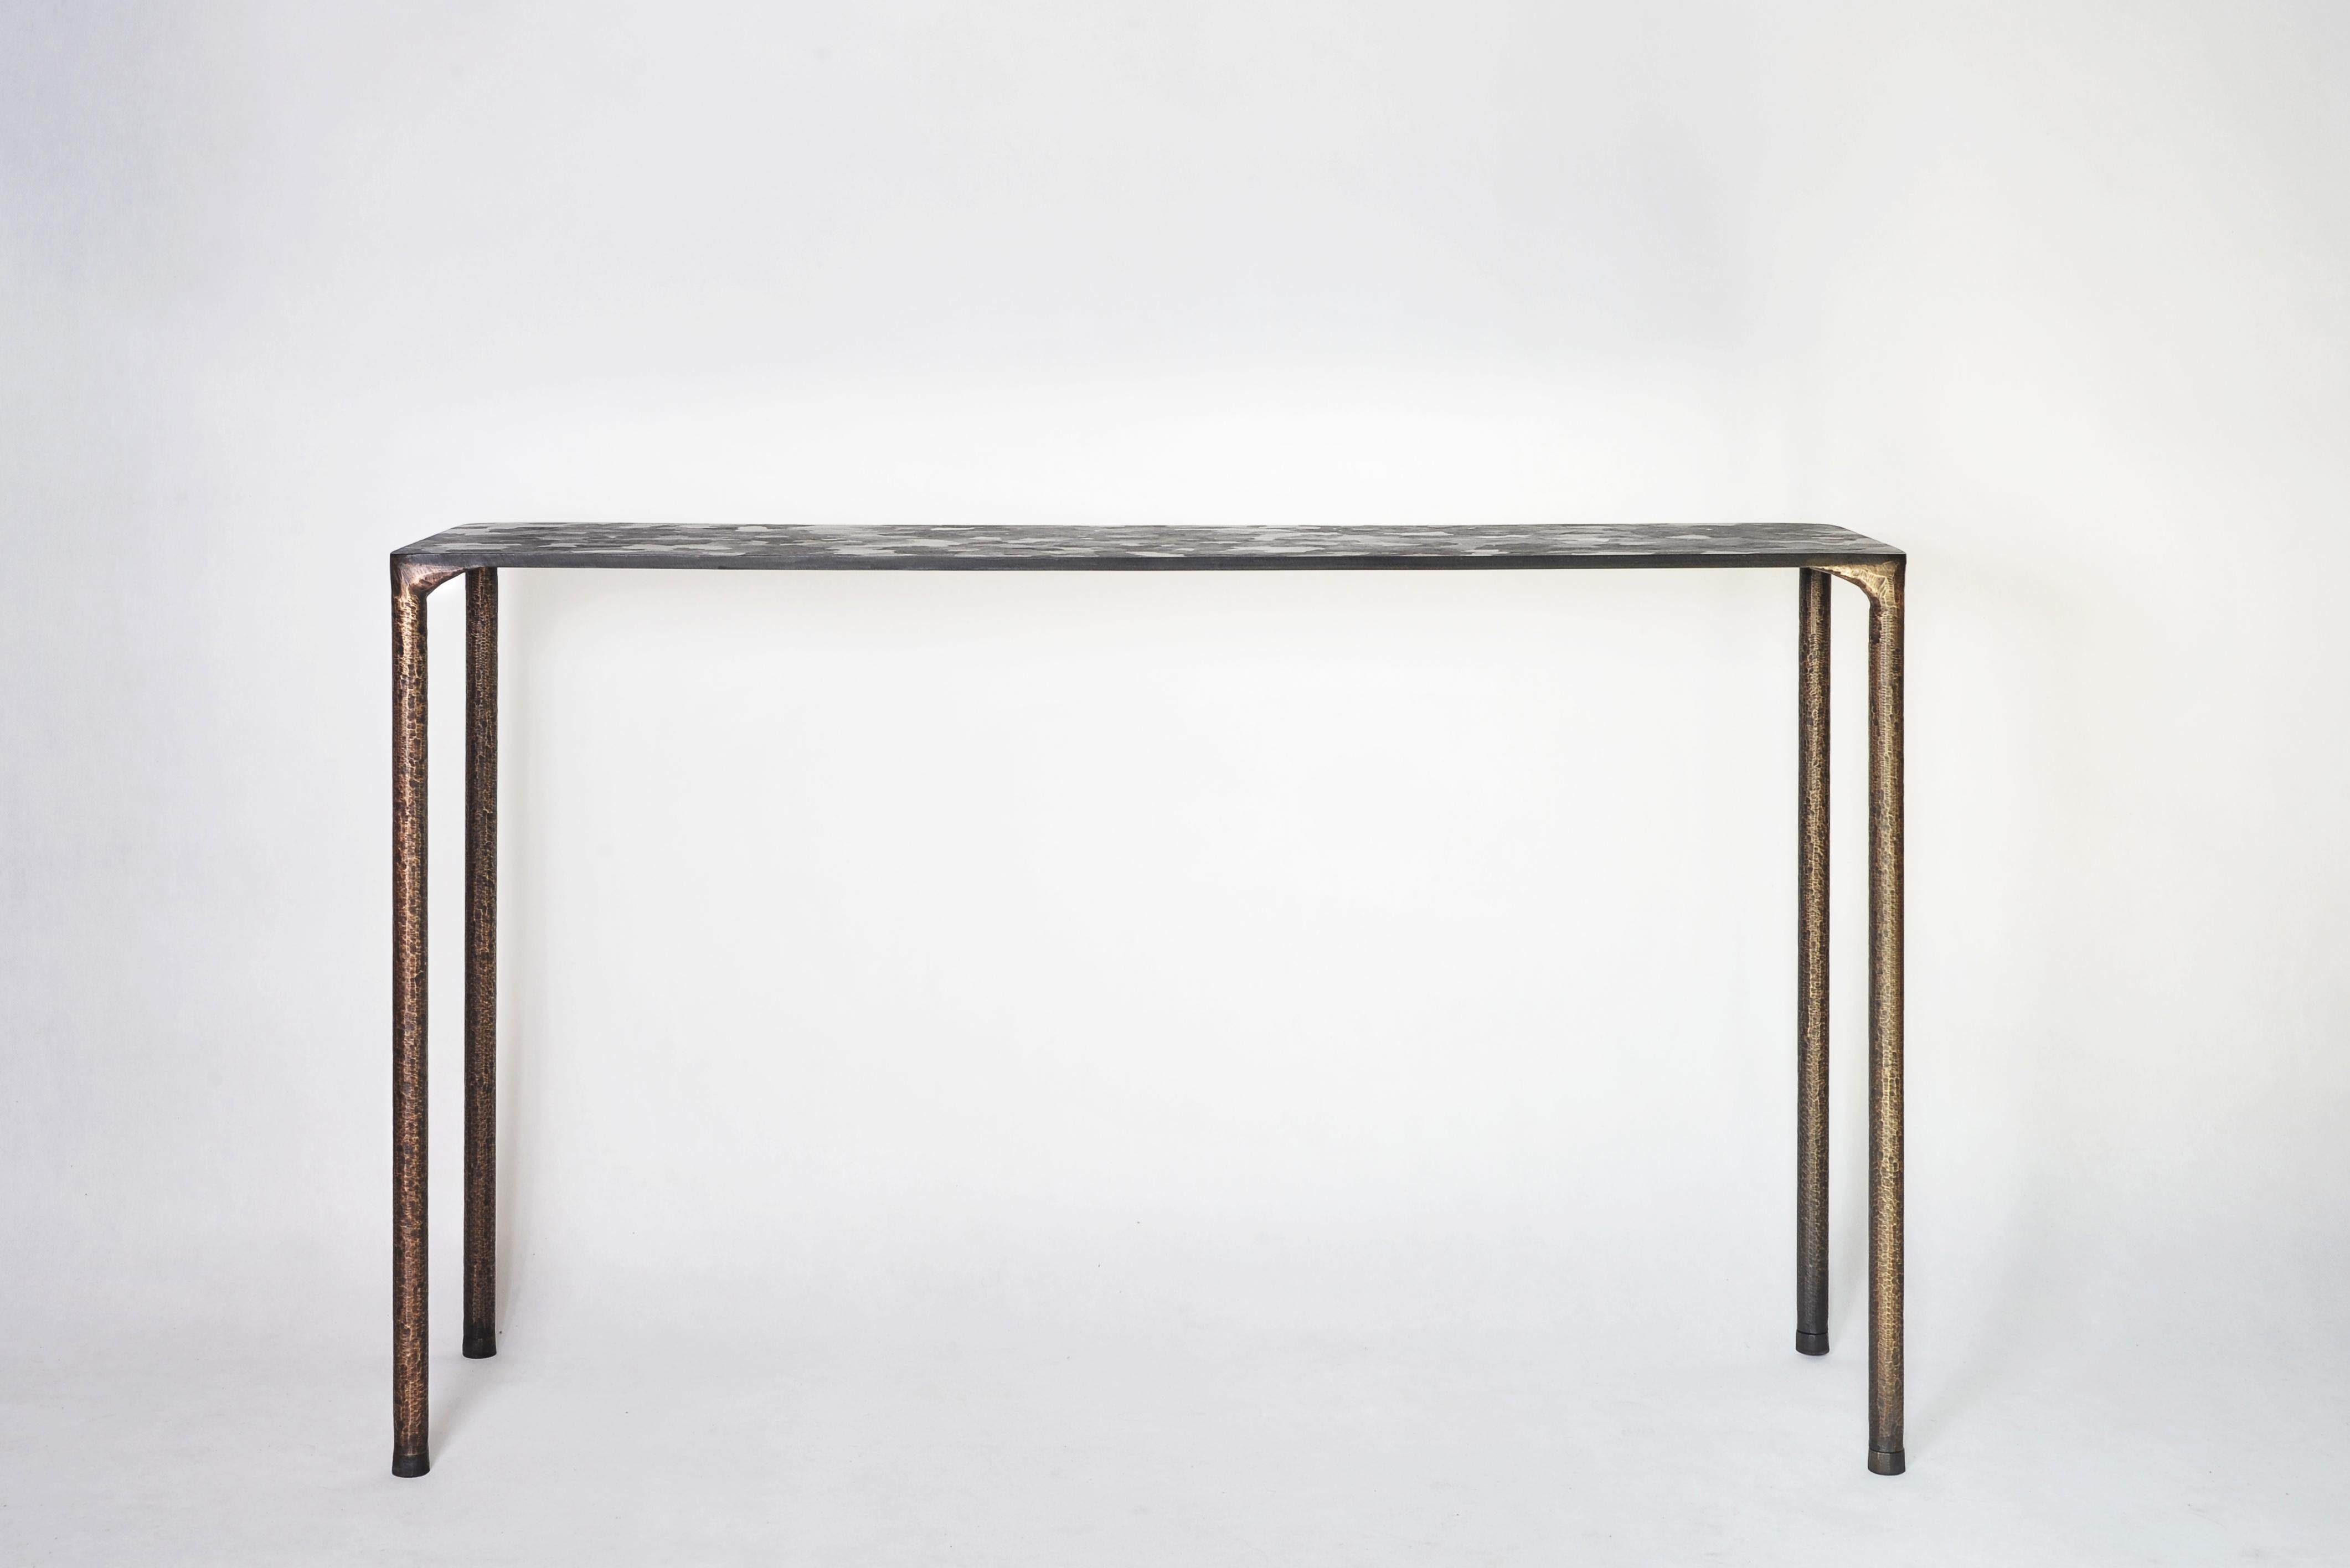 Steel console by Lukasz Friedrich
Dimensions: 127 x 35 x H 78 cm
Materials: Steel
Dimensions are fully customizable.


Lukasz Friedrich (born 1980), lives and works in Warsaw. He is a self-taught
designer and craftsman. Lukasz grew up in and around